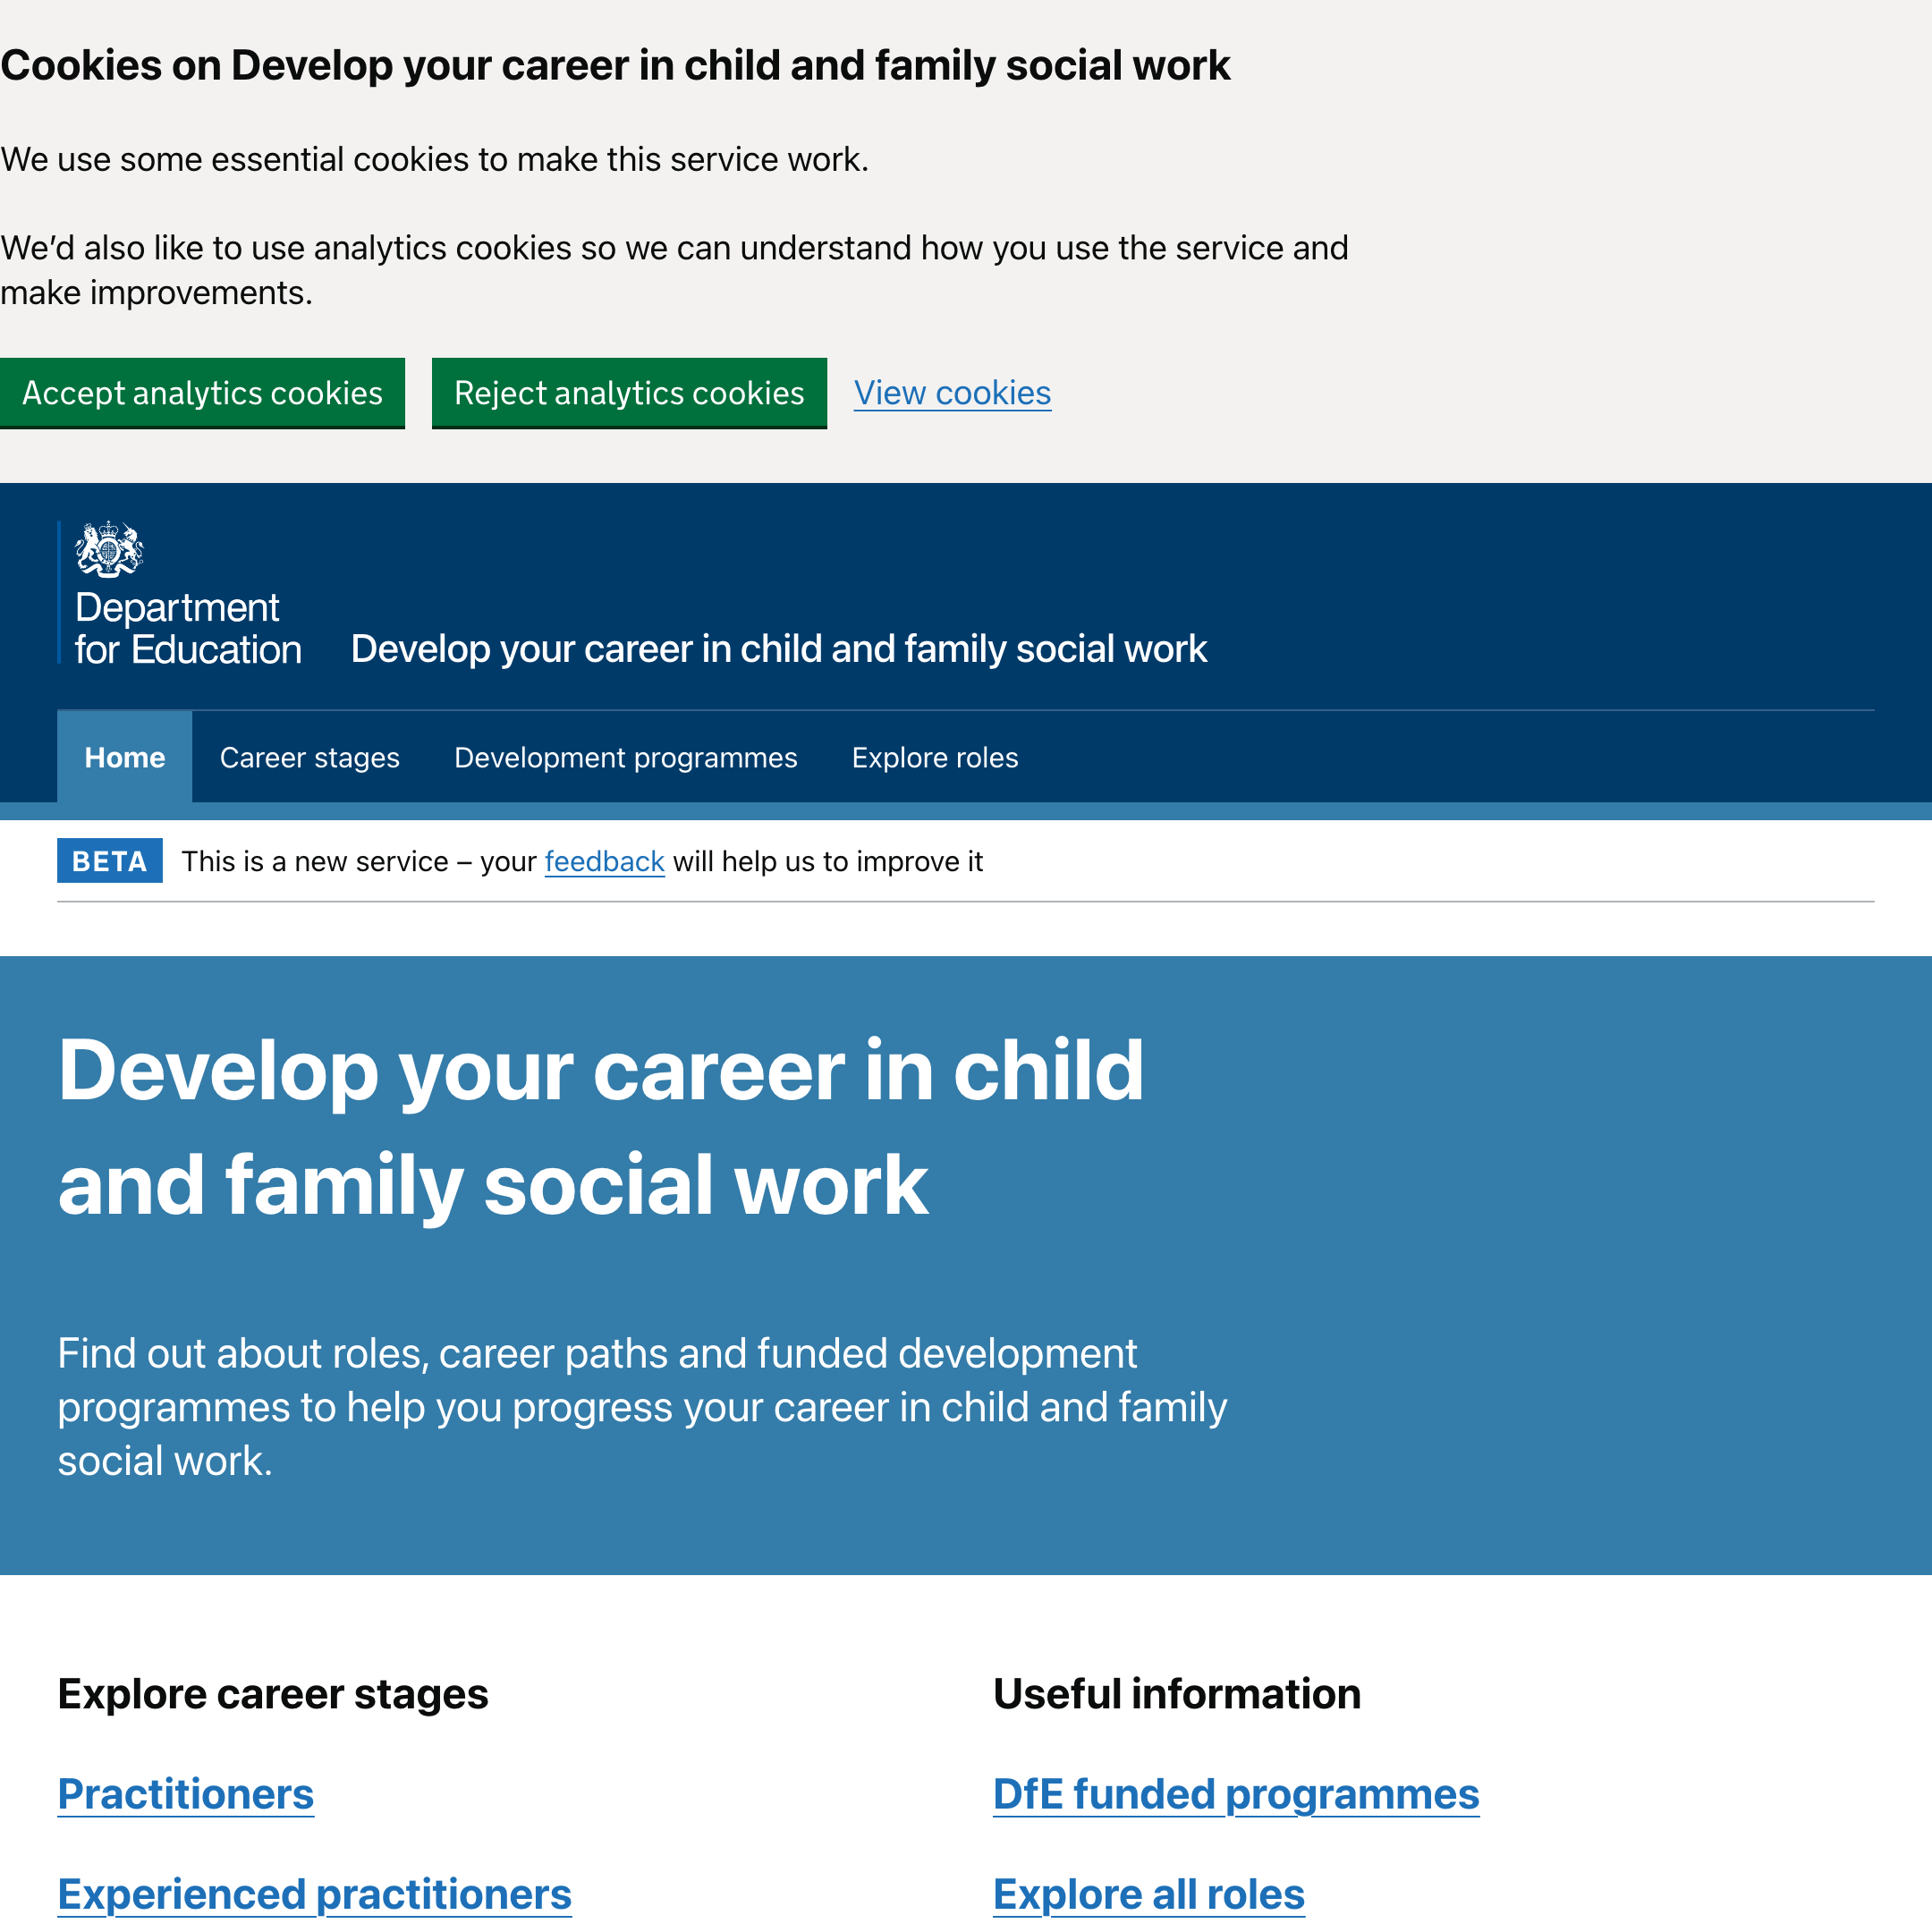 Develop your career in child and family social work